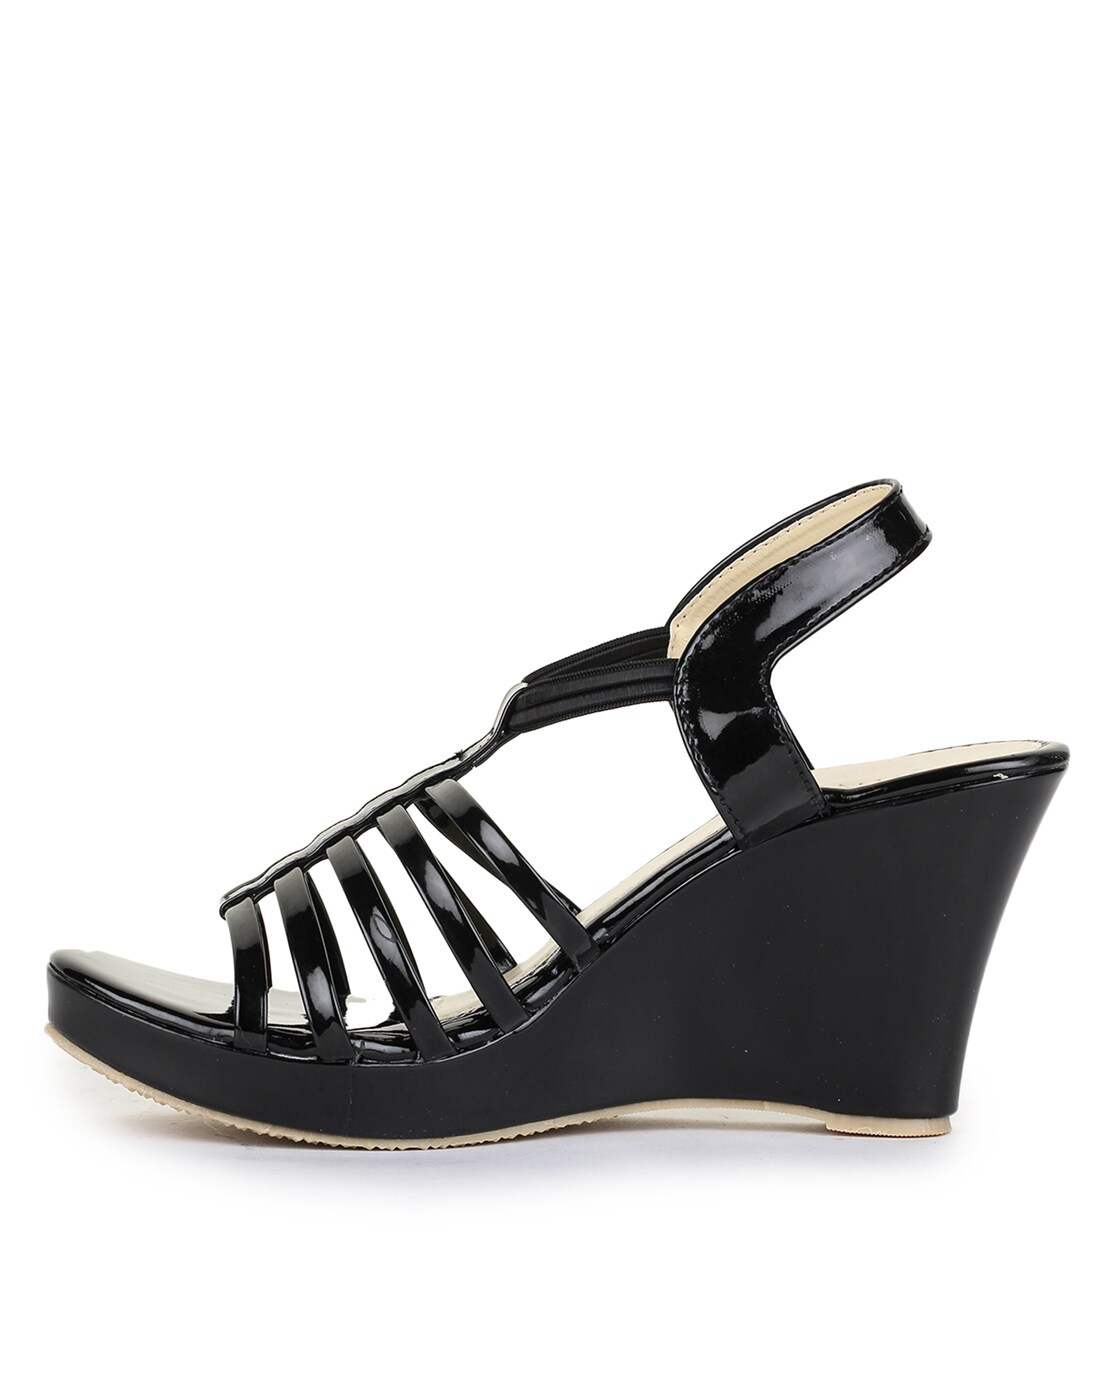 Buy Black Heeled Sandals for Women by R 